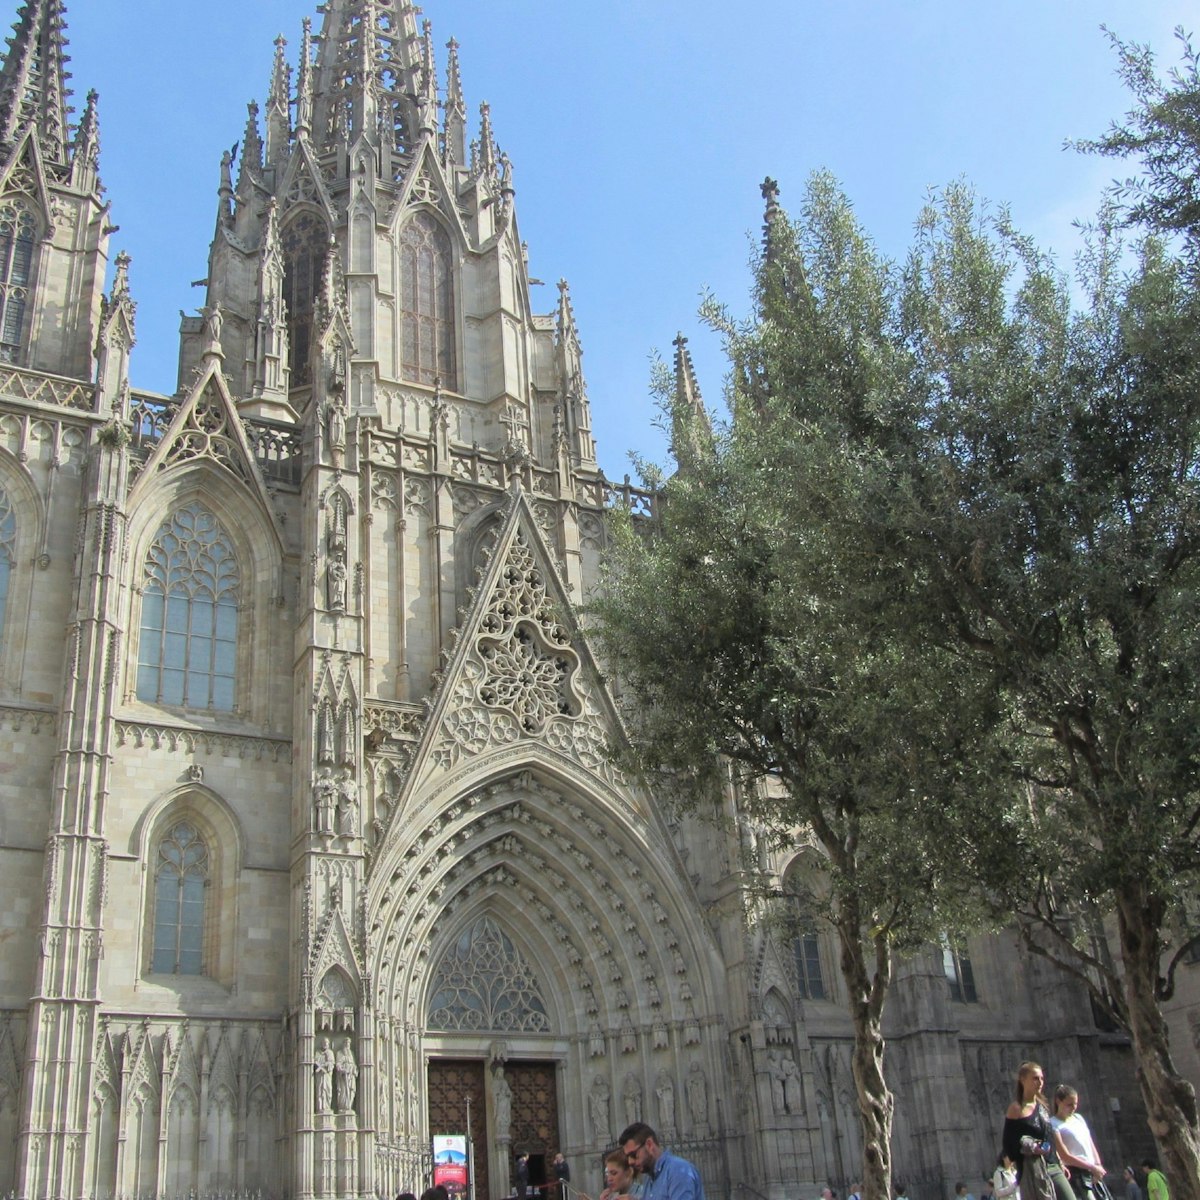 Outside of the Cathedral